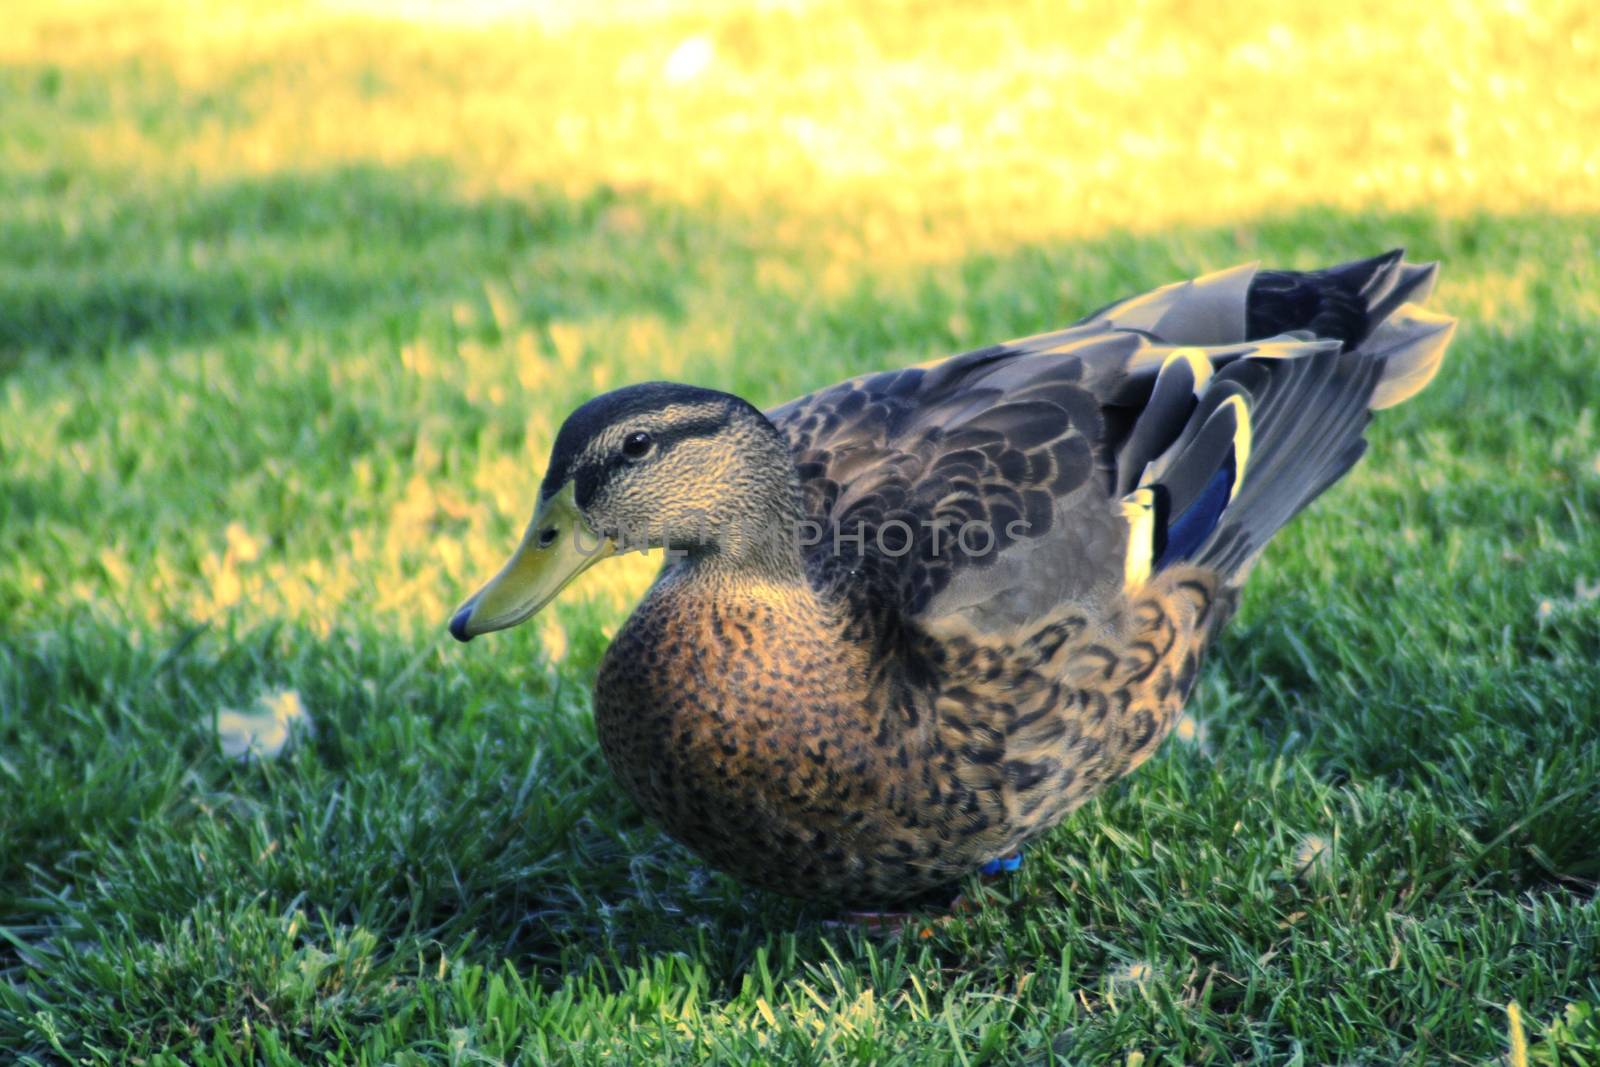 A duck in the grass. High quality photo